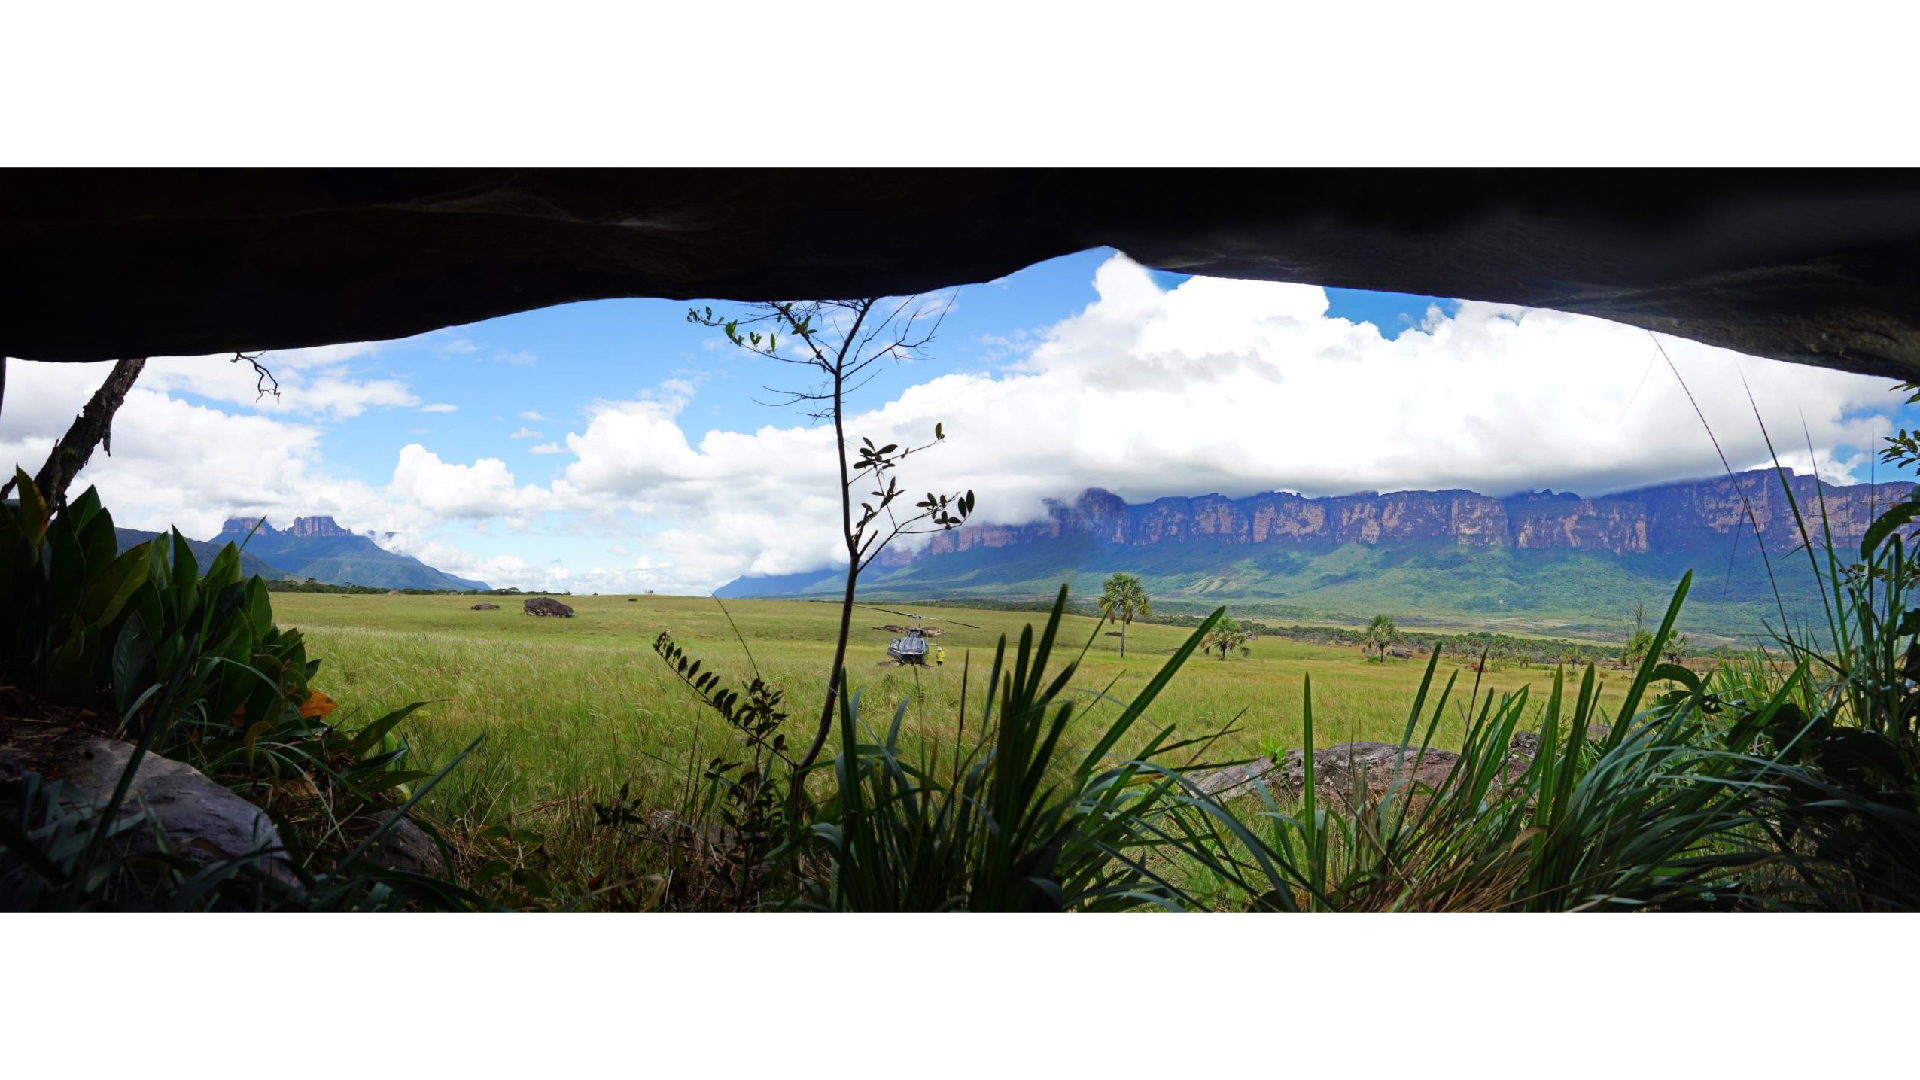 A panoramic view from inside the cave of a grassy plain with rocky mesas